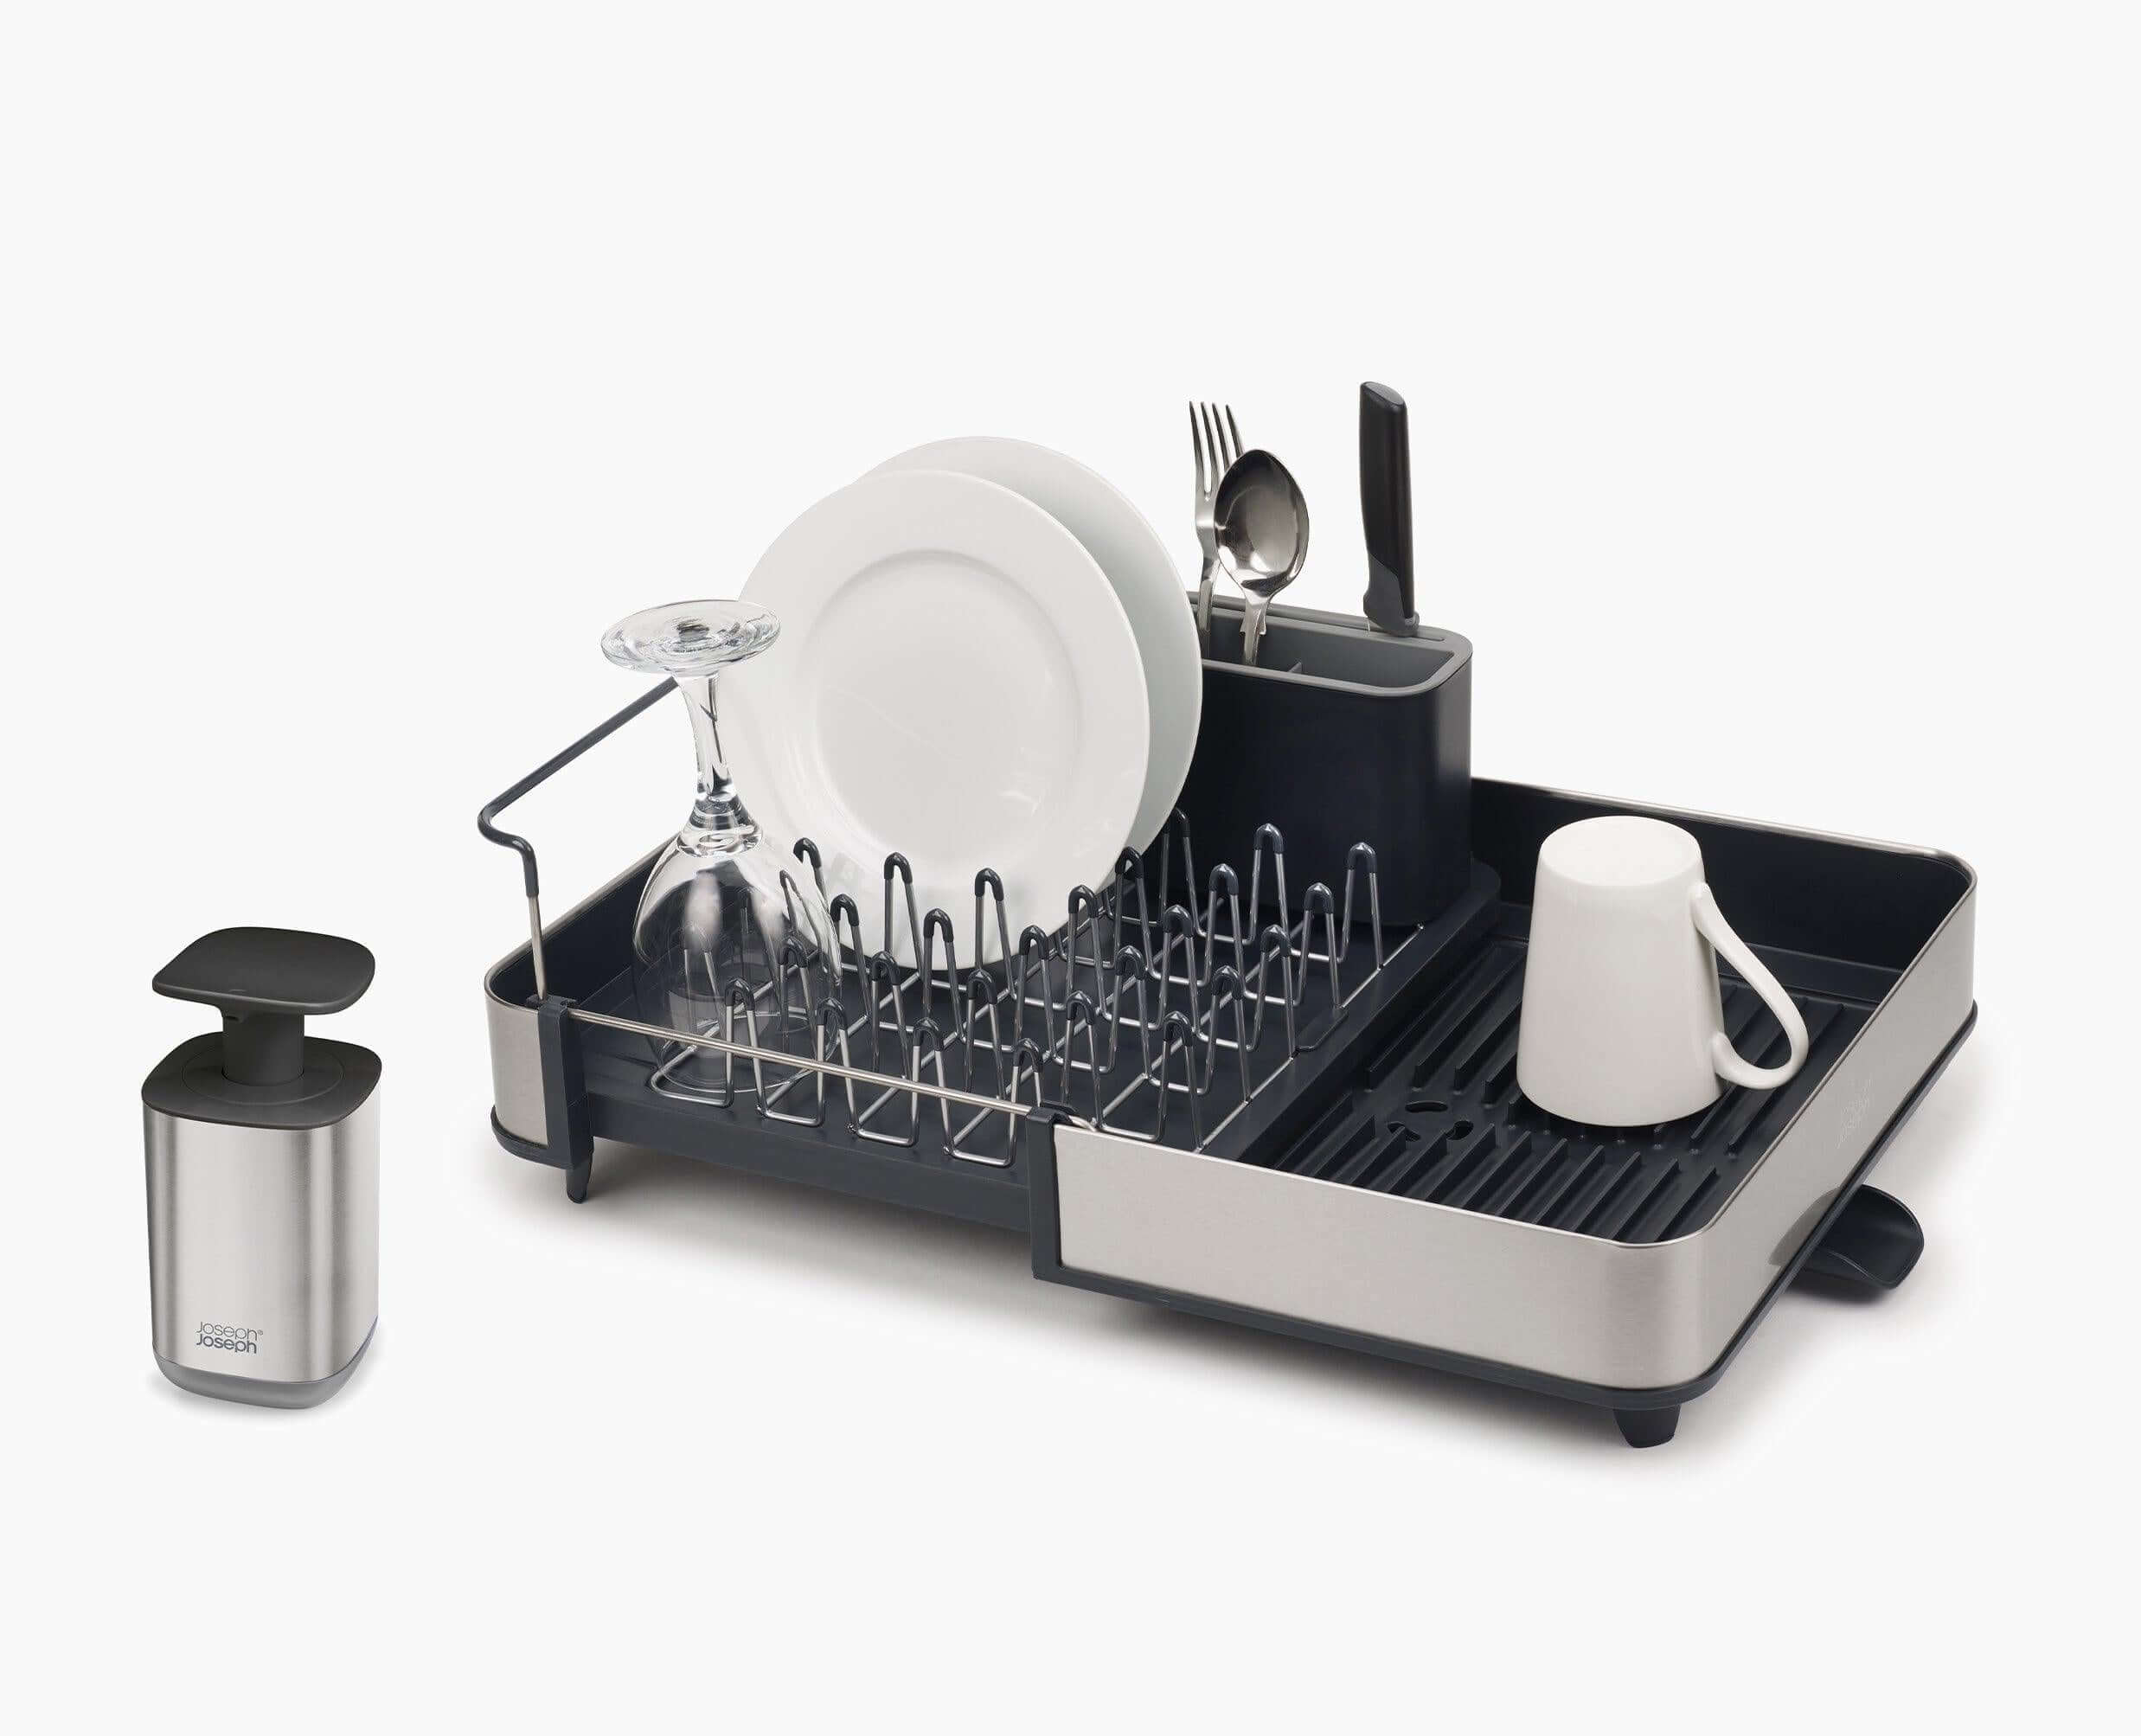 BEON.COM.AU This stylish set includes two highly-functional products to help make your sink-space shine. Dish rack extends to hold more items when needed Features draining spout, chopping board rail, raised ribs to prevent water being trapped and a movable cutlery pot Soap pump features large, easy-push head... Joseph Joseph at BEON.COM.AU